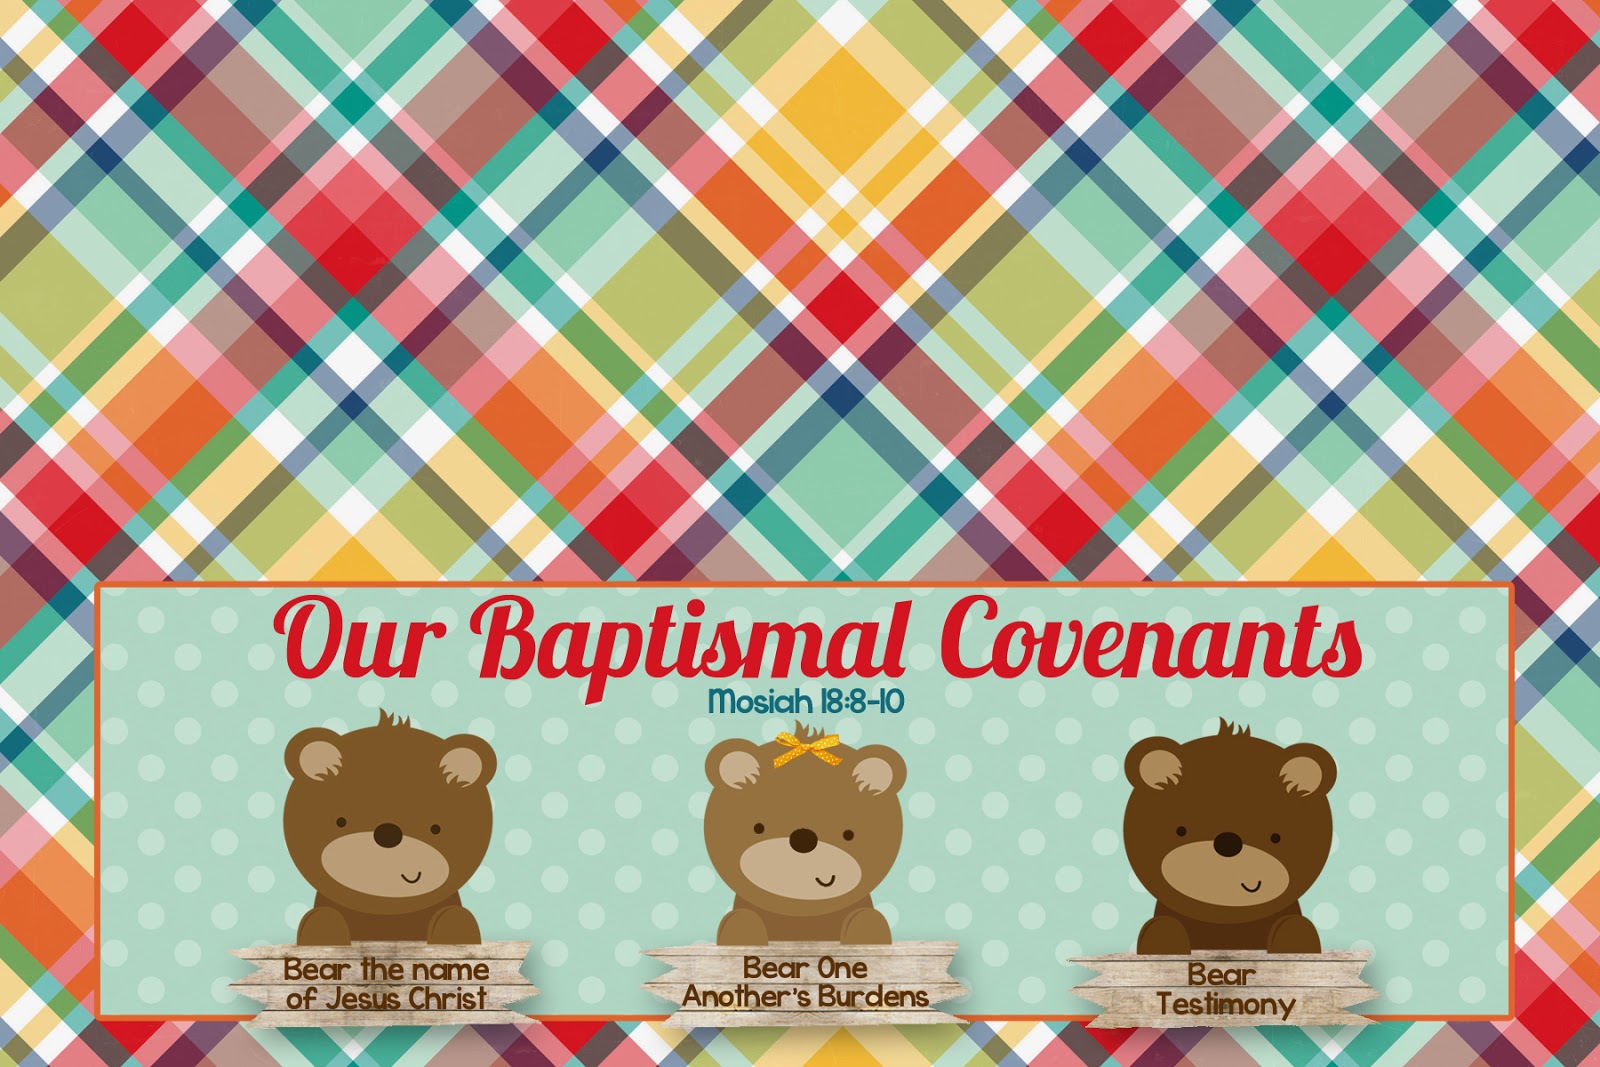 a-pocket-full-of-lds-prints-the-three-bears-of-baptism-free-tags